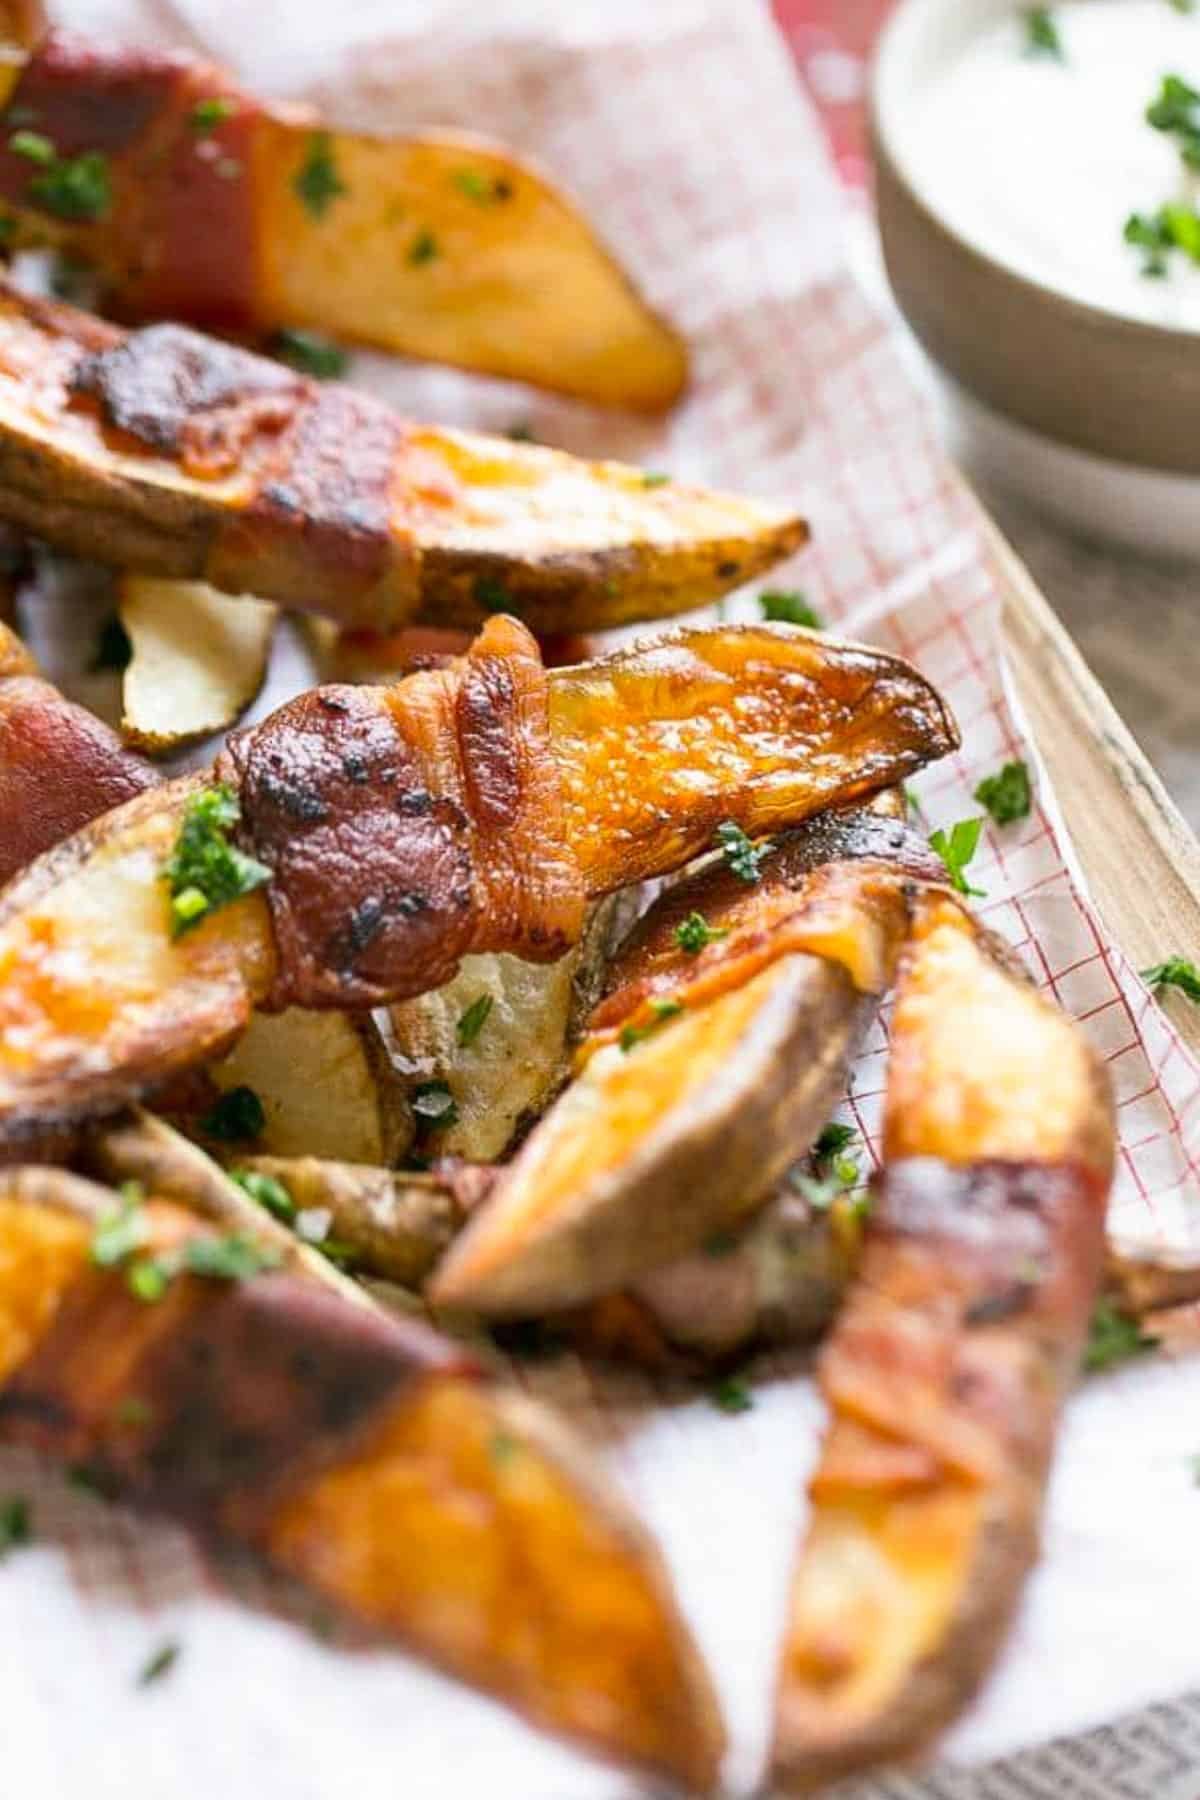 French fries wrapped in bacon and topped with parsley.